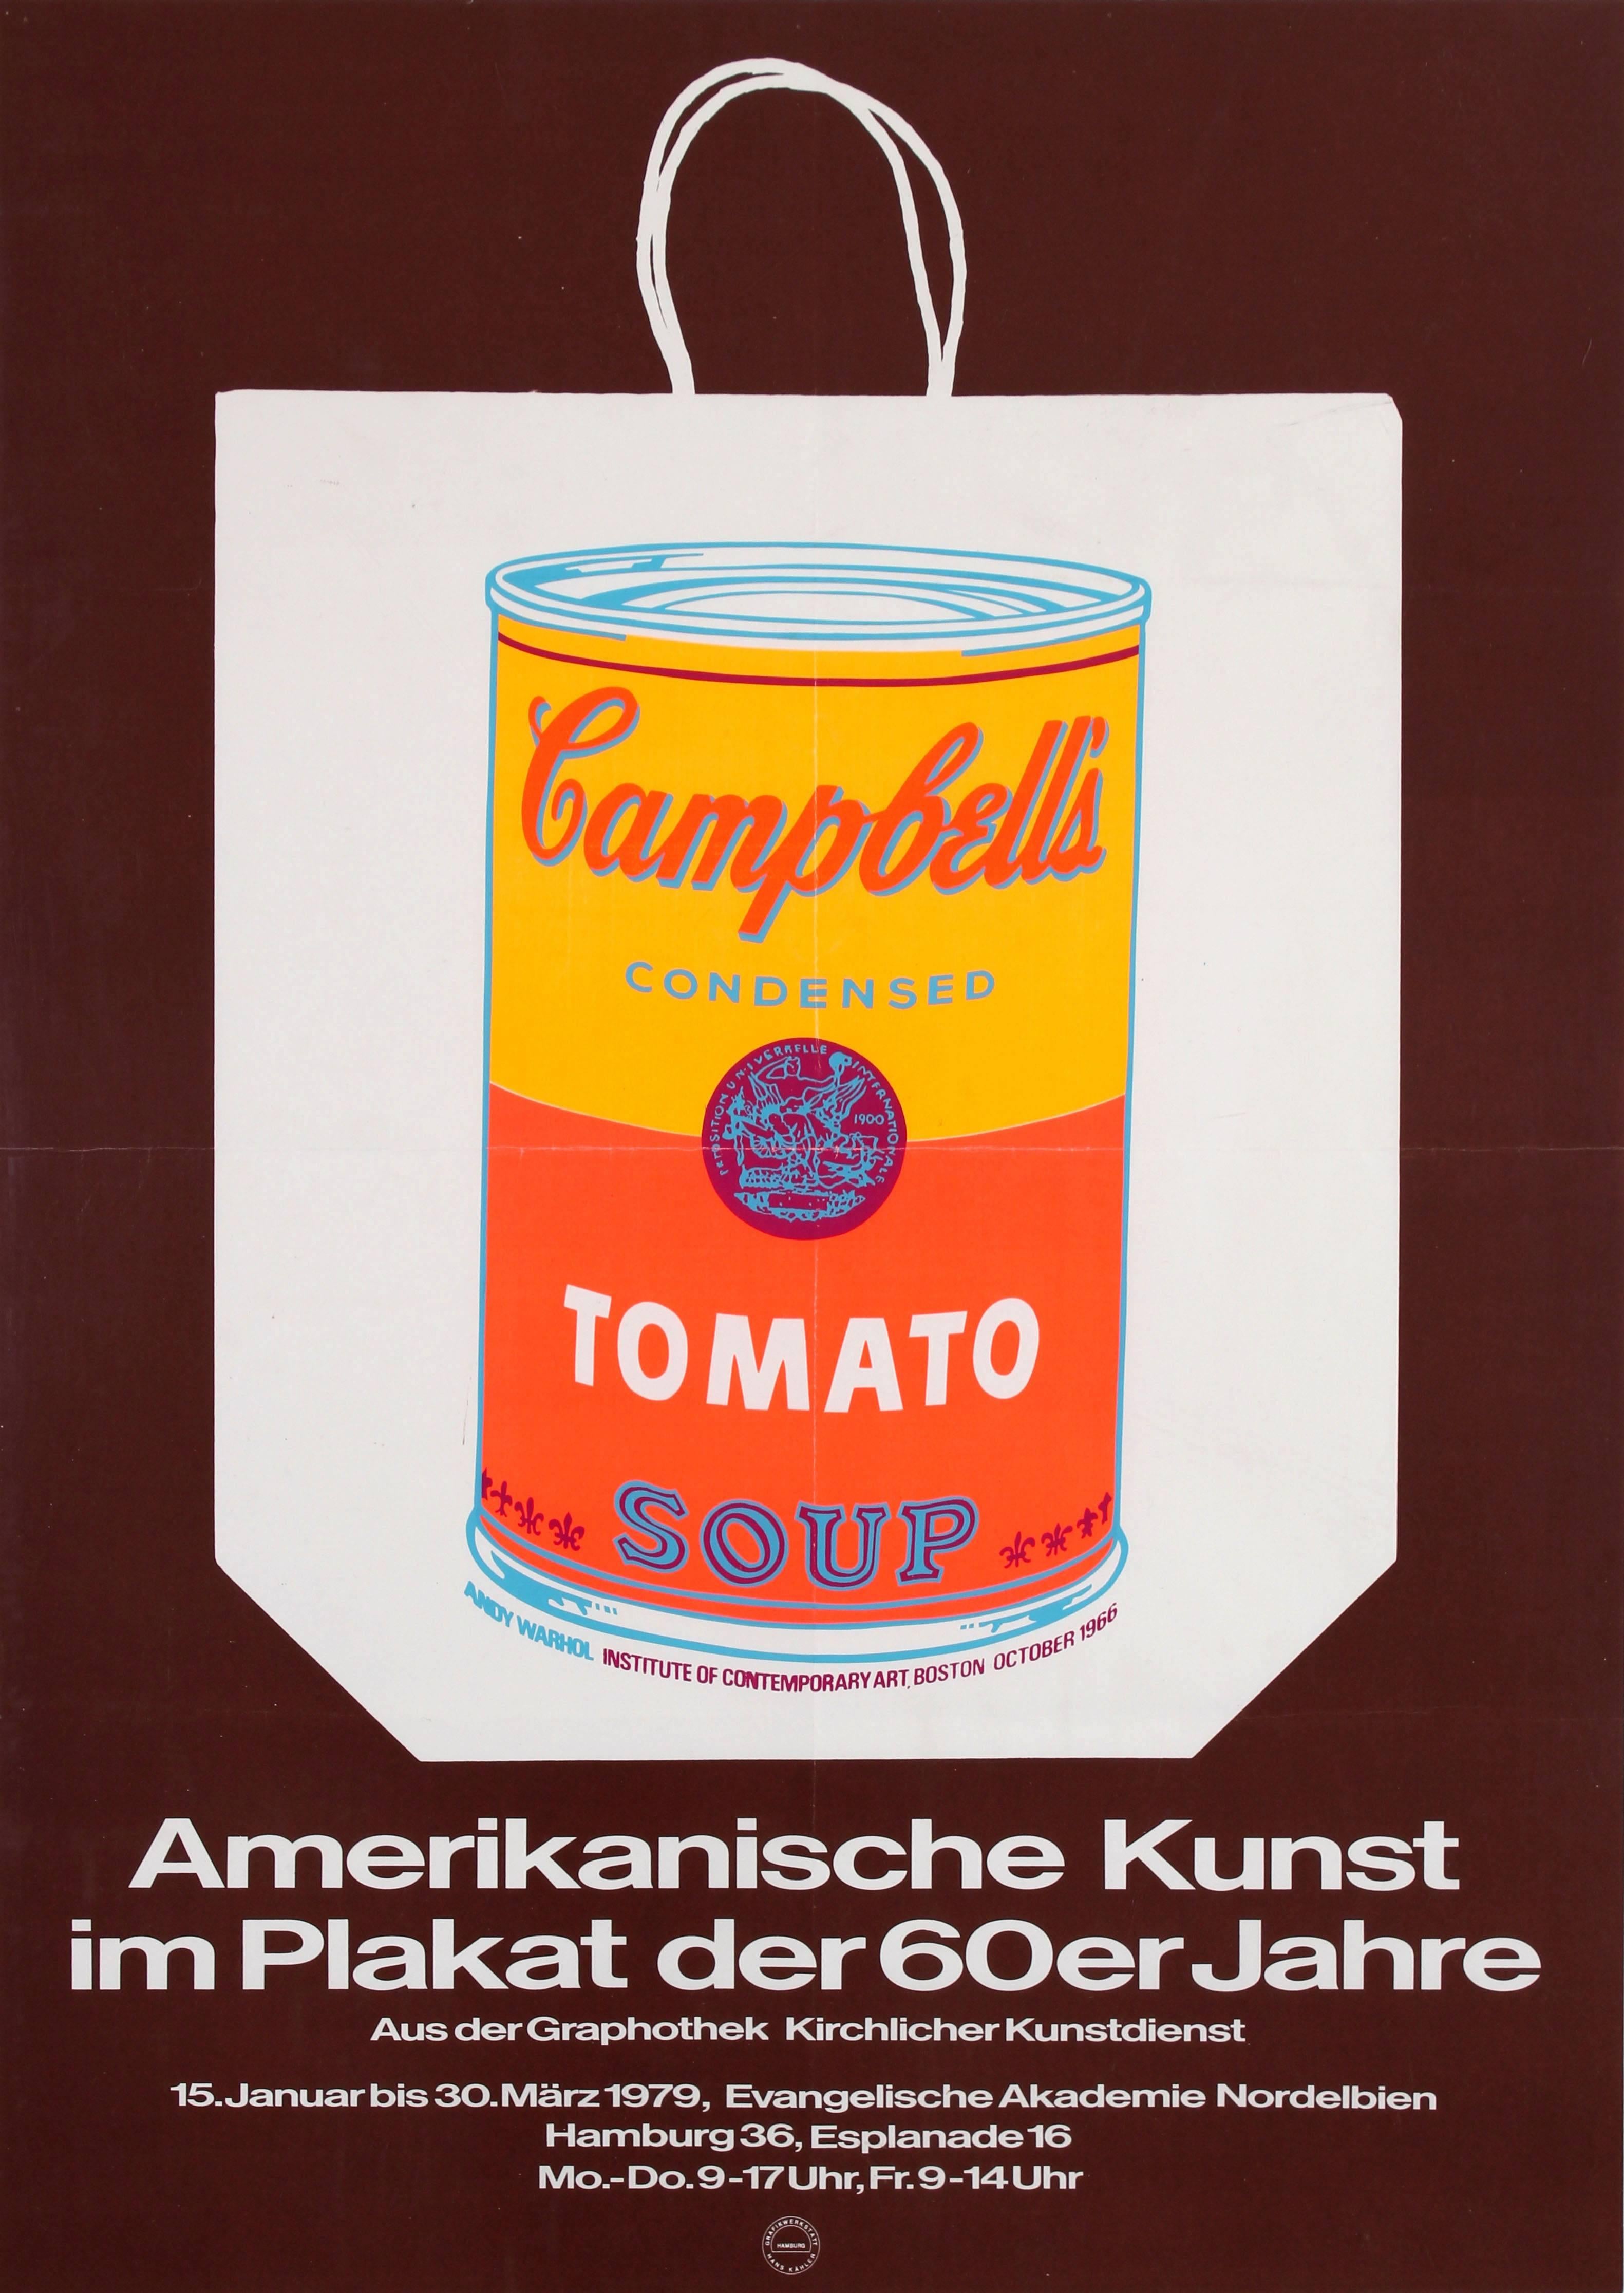 Andy Warhol Print - Original Vintage American Poster Art Exhibition Poster - Campbell's Tomato Soup